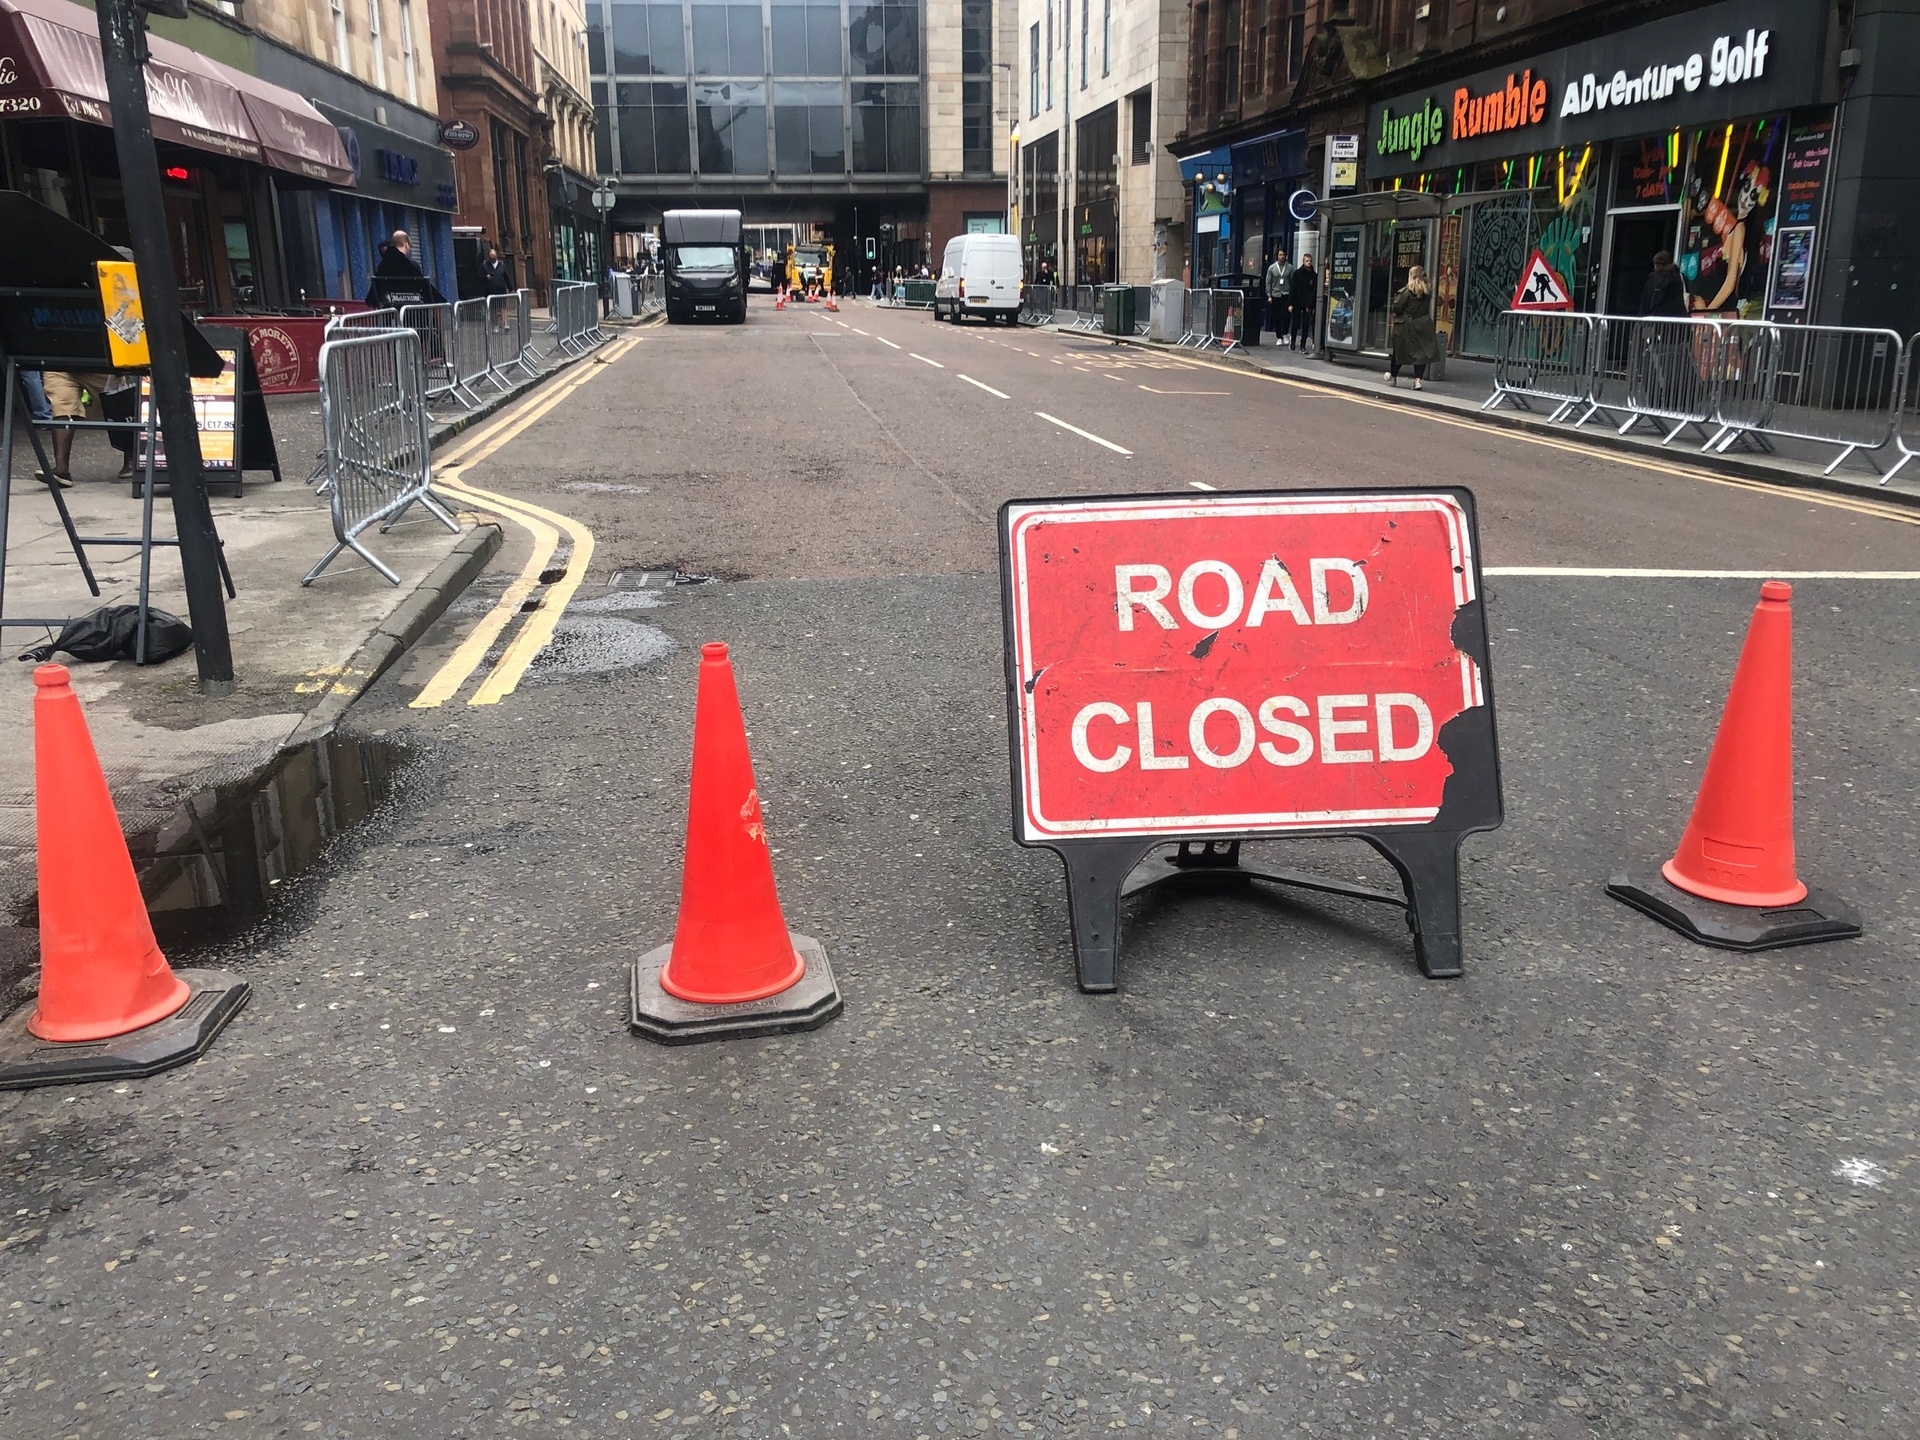 Roads have been closed in preparation.